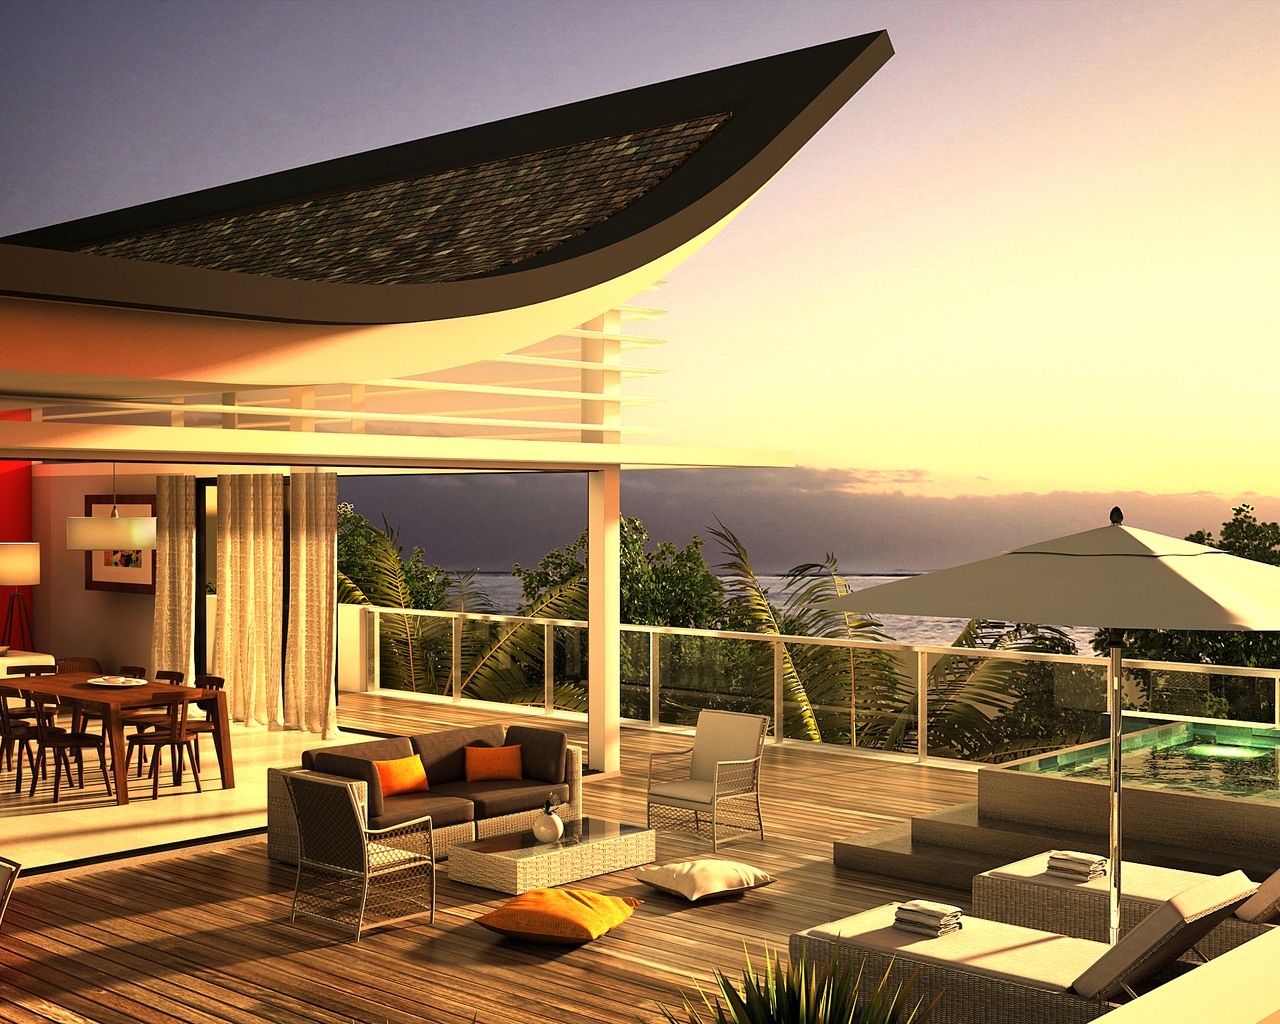 Luxury Villa Terrace View for 1280 x 1024 resolution